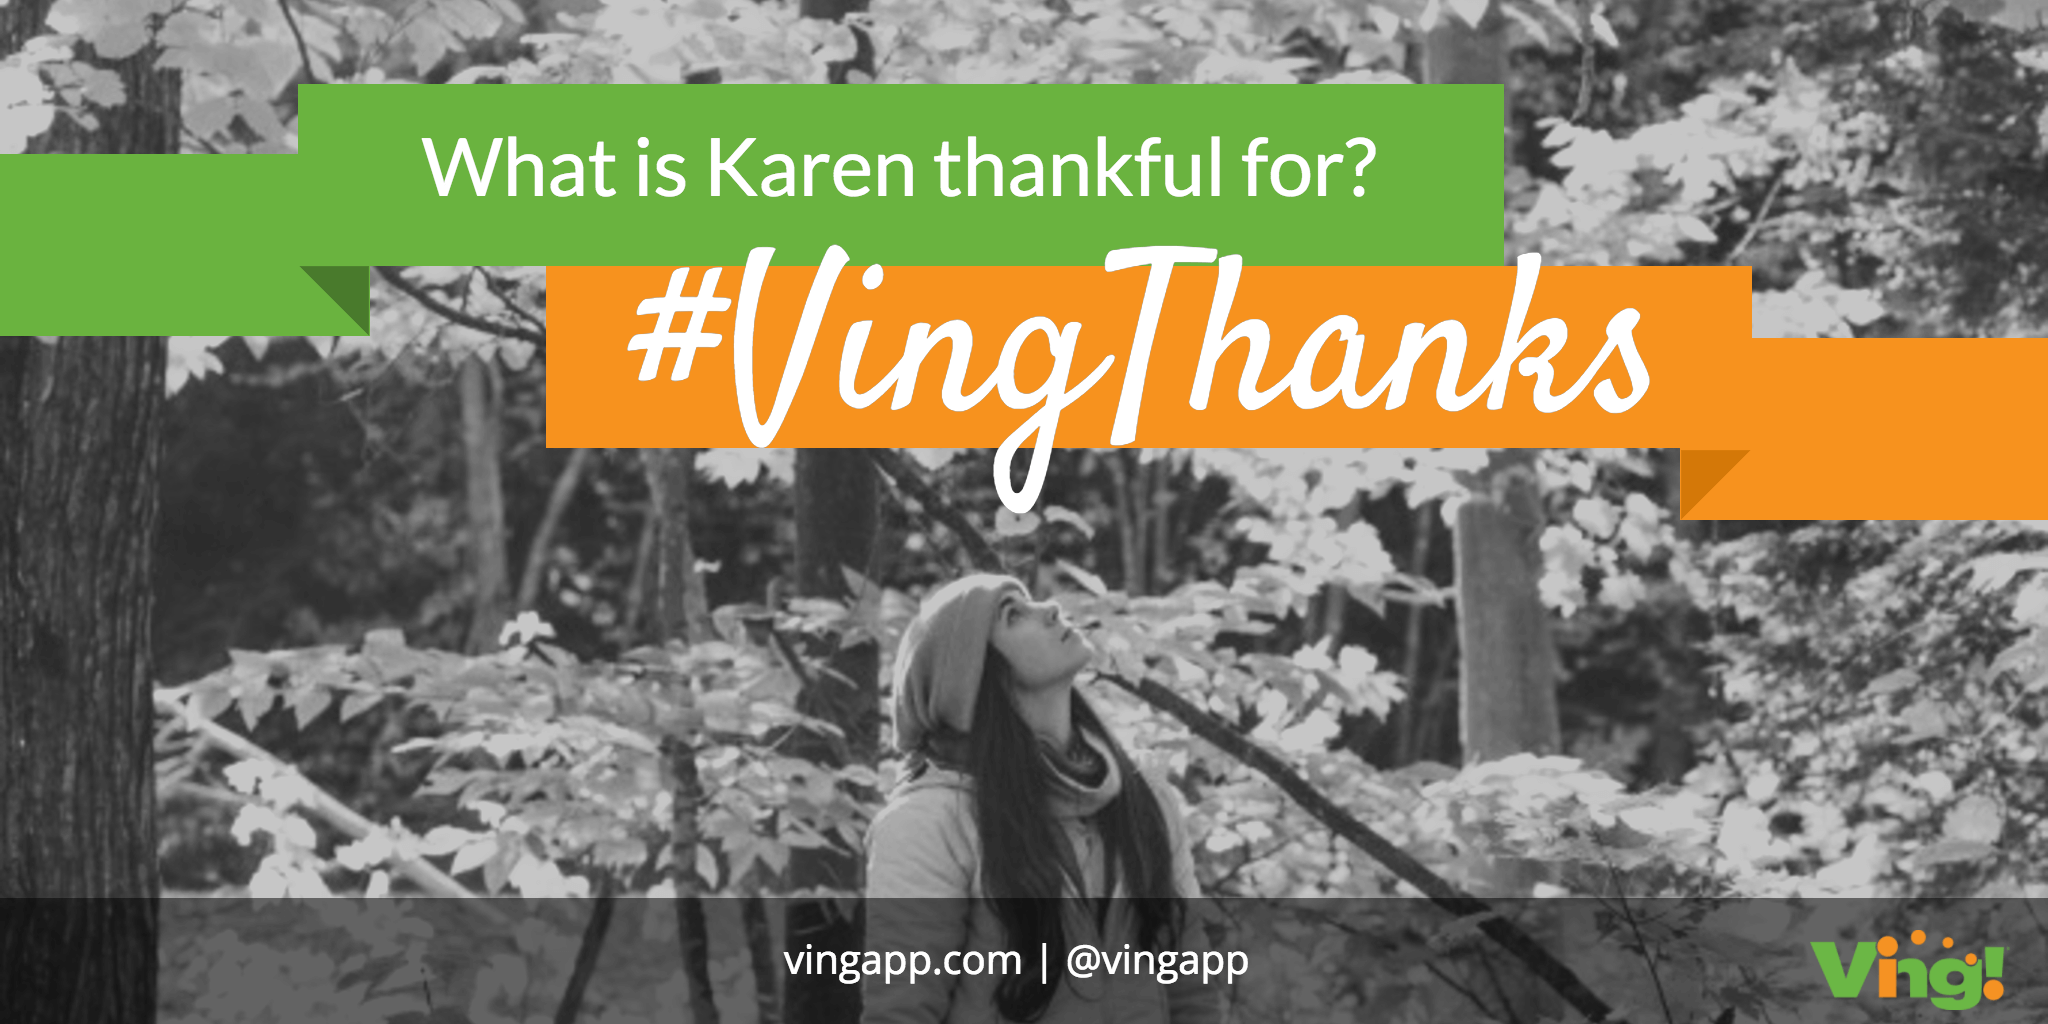 What Our Ving Success Manager Is Thankful For